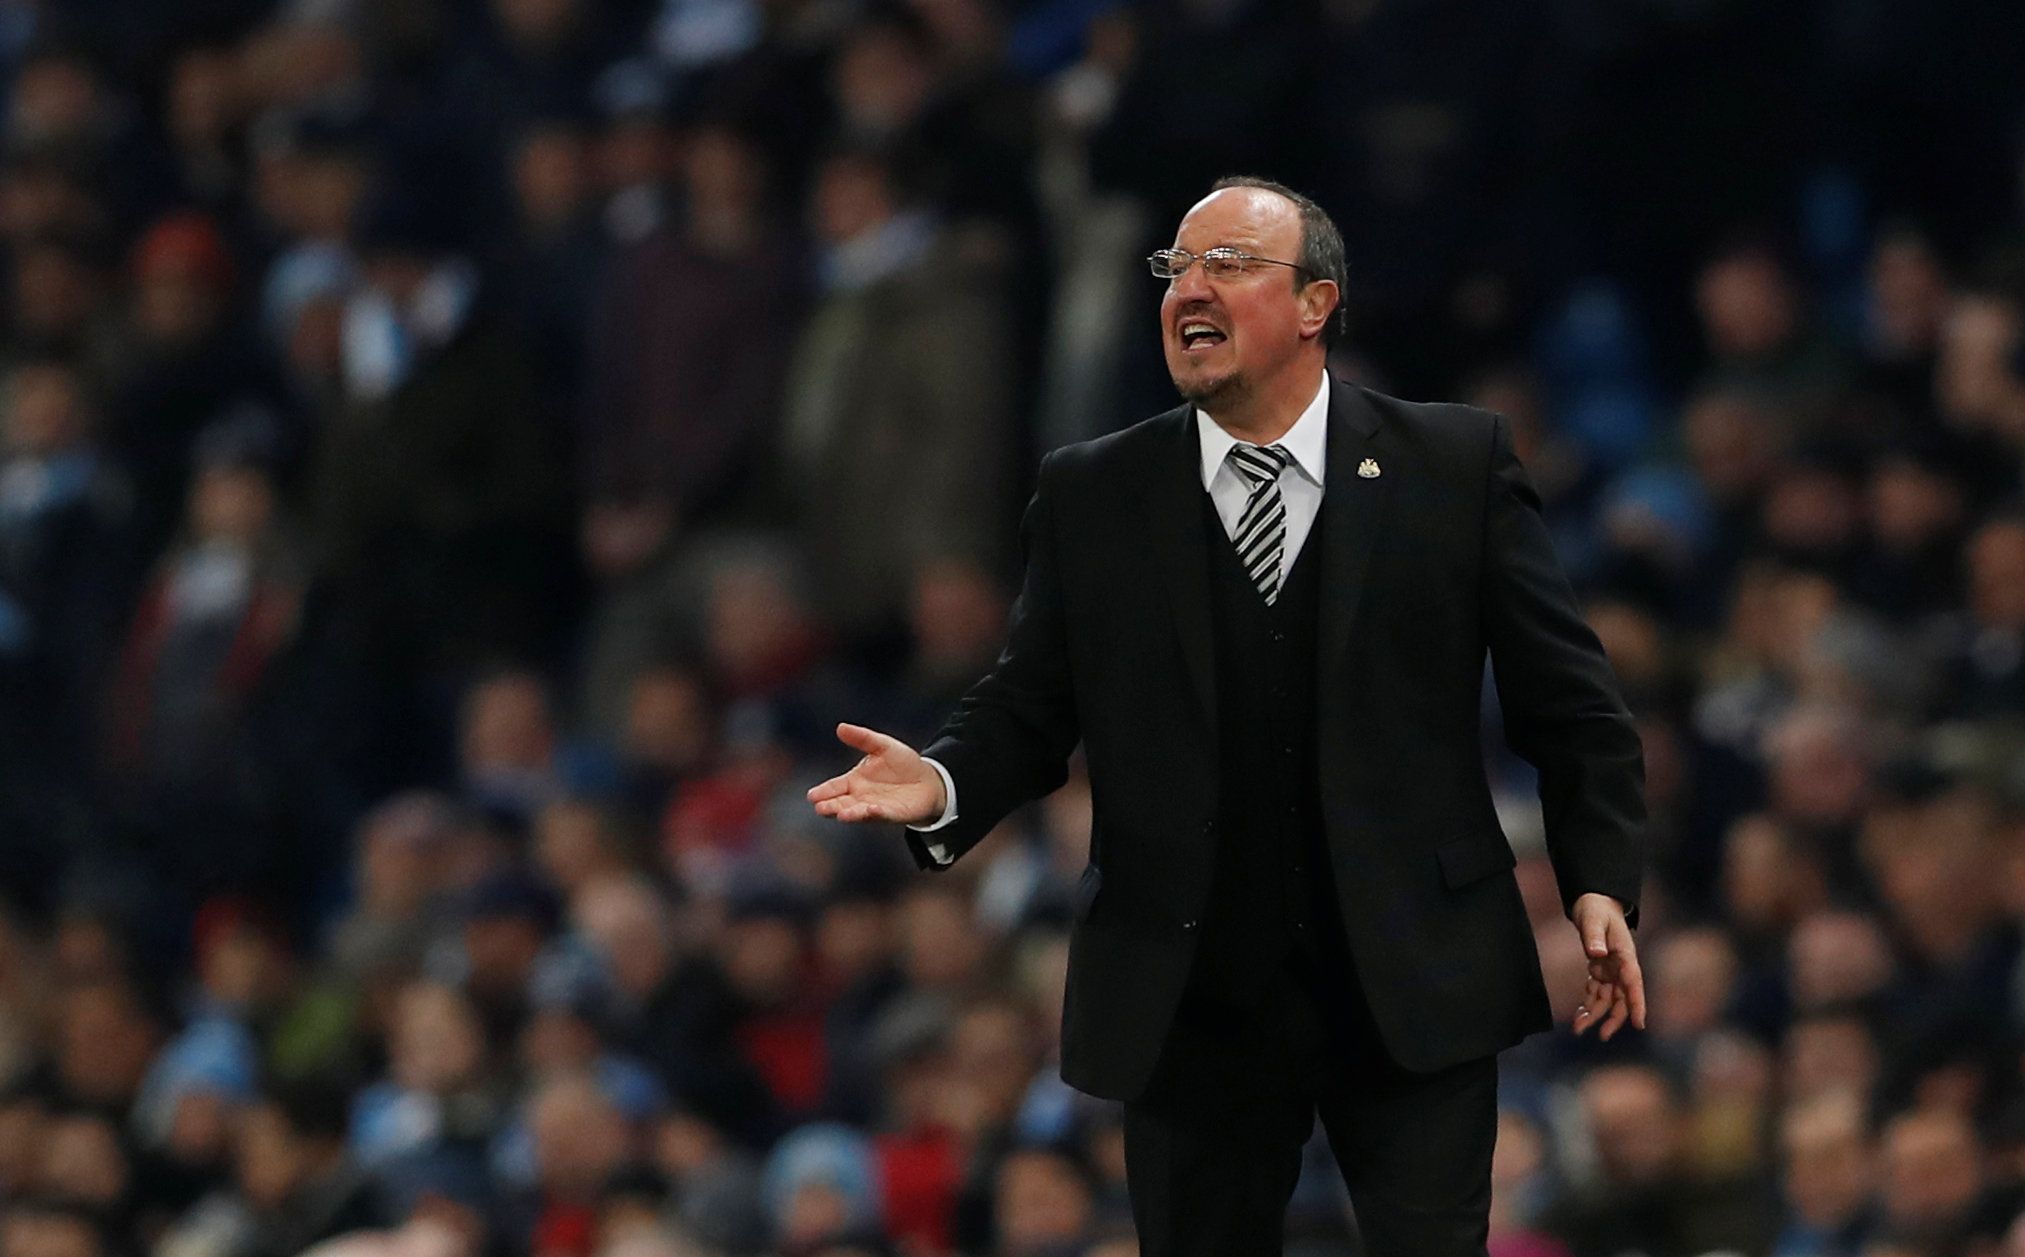 Soccer Football - Premier League - Manchester City vs Newcastle United - Etihad Stadium, Manchester, Britain - January 20, 2018   Newcastle United manager Rafael Benitez      Action Images via Reuters/Lee Smith    EDITORIAL USE ONLY. No use with unauthorized audio, video, data, fixture lists, club/league logos or 